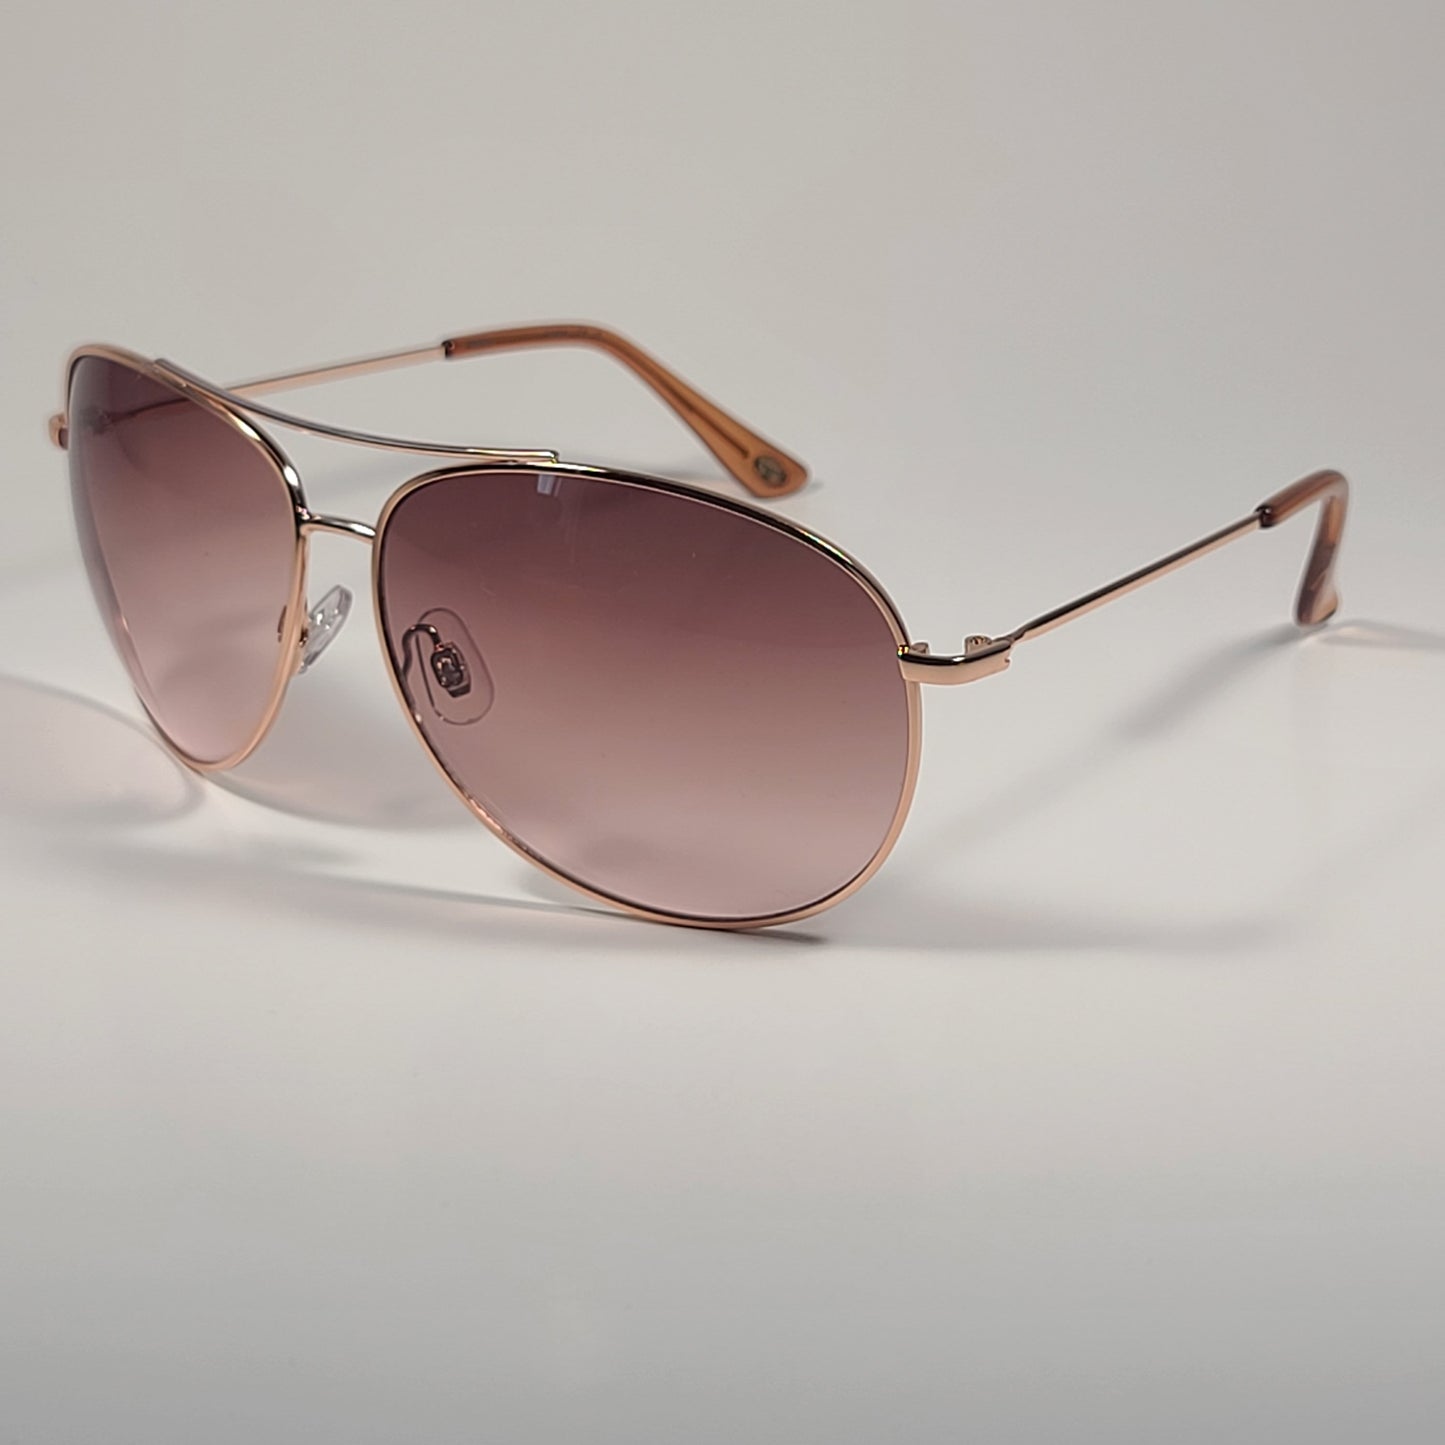 Fossil Aviator Sunglasses Rose Gold Frame Large Lens Brown Pink Gradient FW11 - Sunglasses